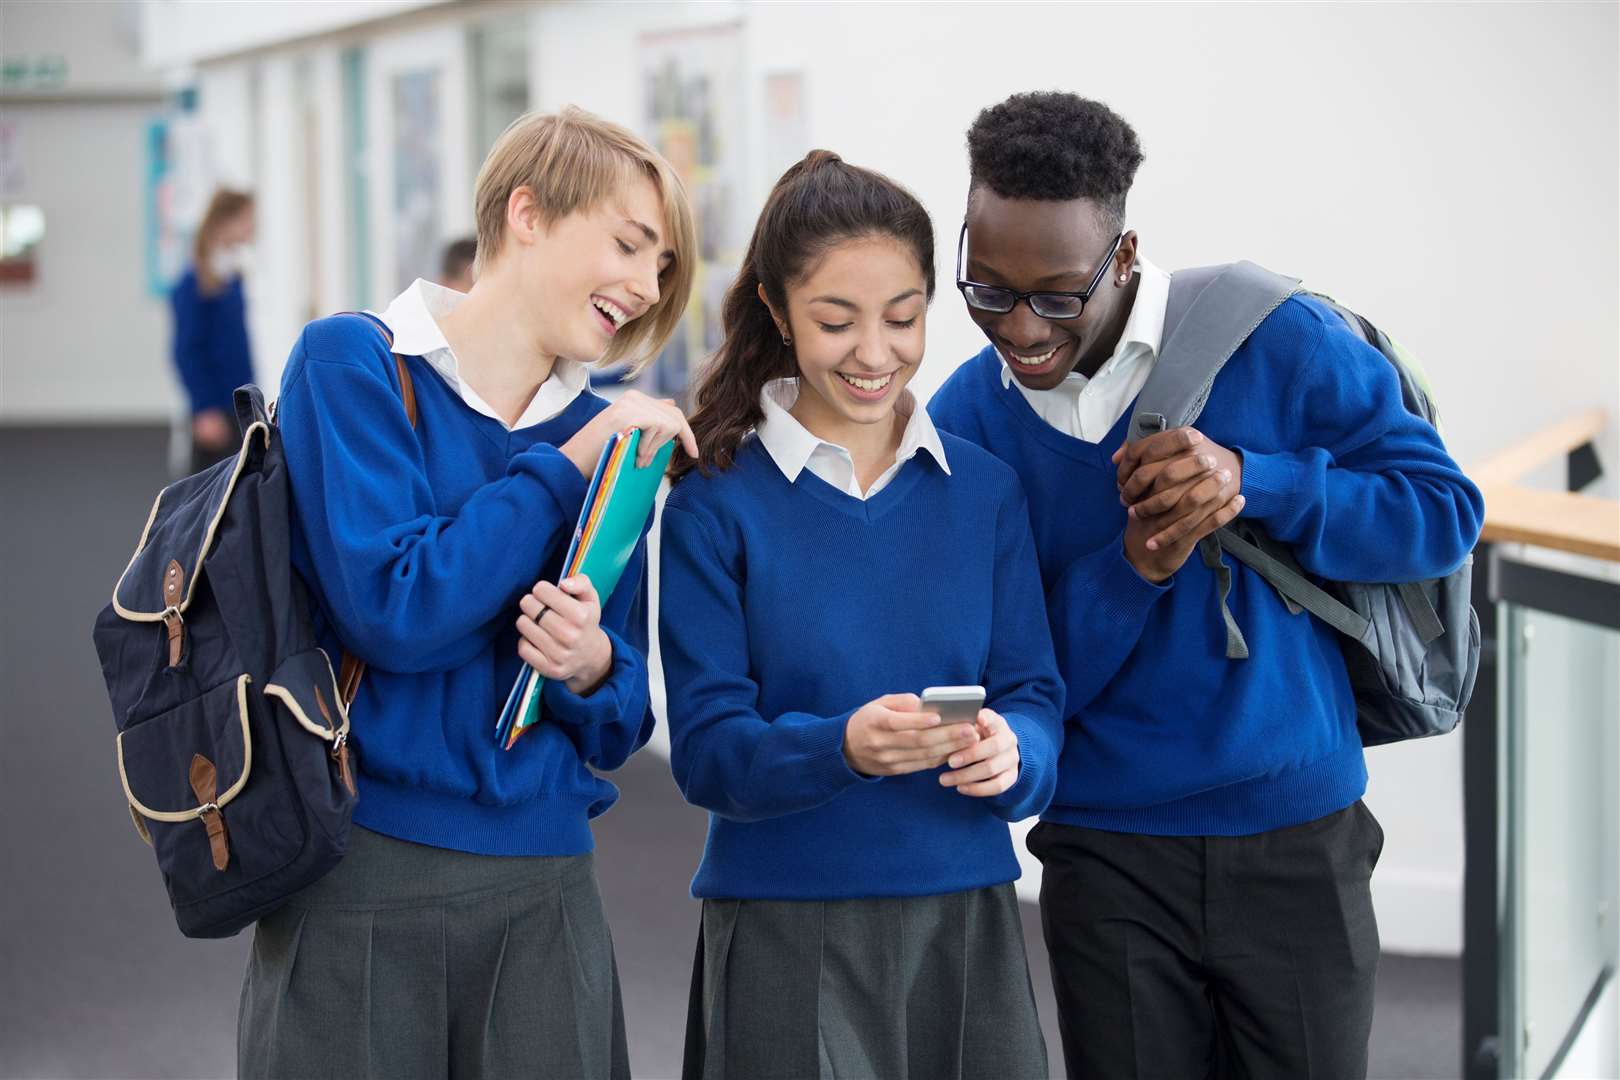 Payments for teenagers staying in education stop after their GCSEs unless parents renew their claim. Image: iStock.